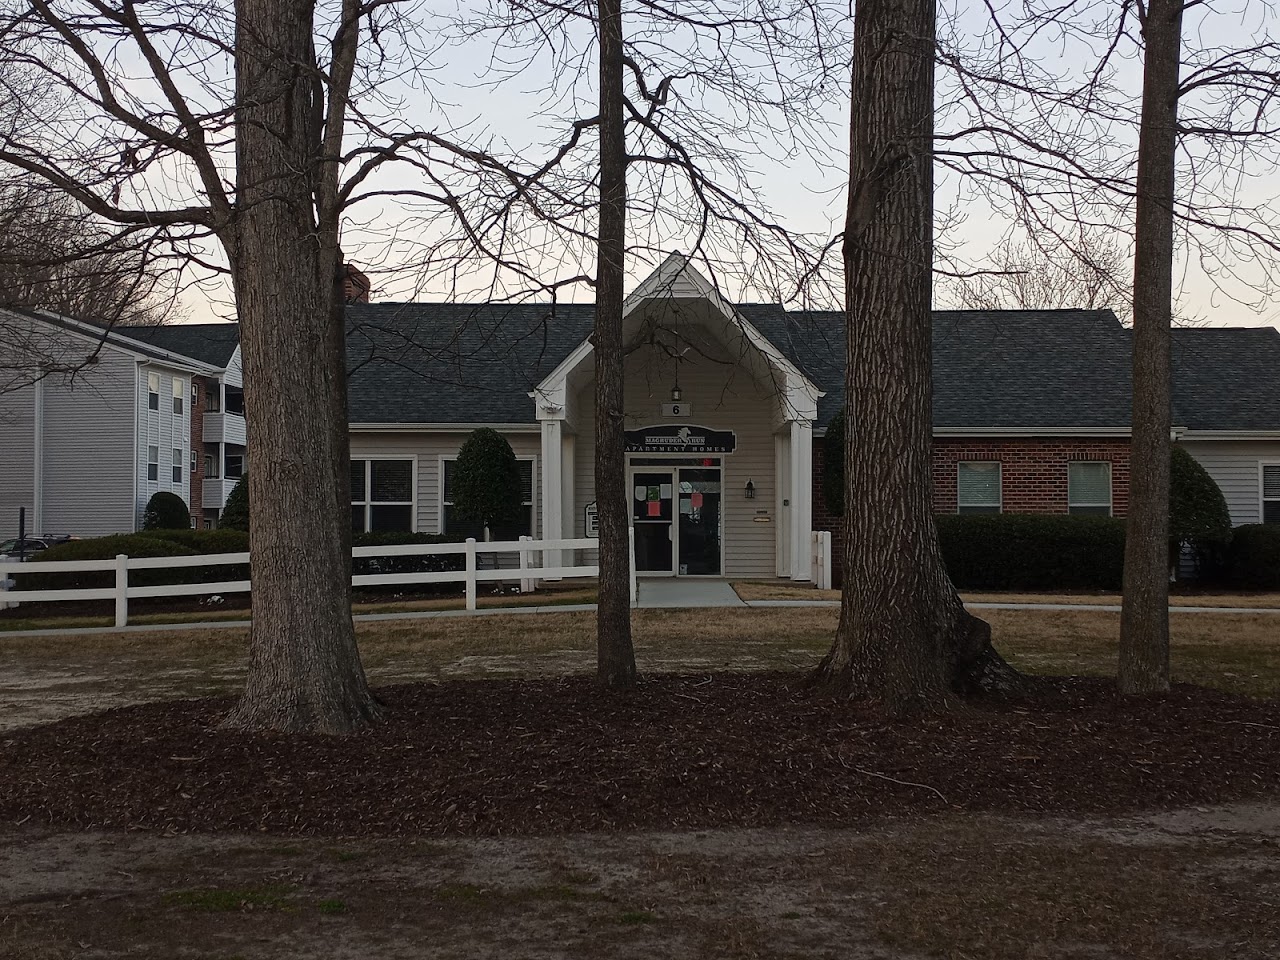 Photo of DERBY RUN I. Affordable housing located at 6 DERBY DR HAMPTON, VA 23666